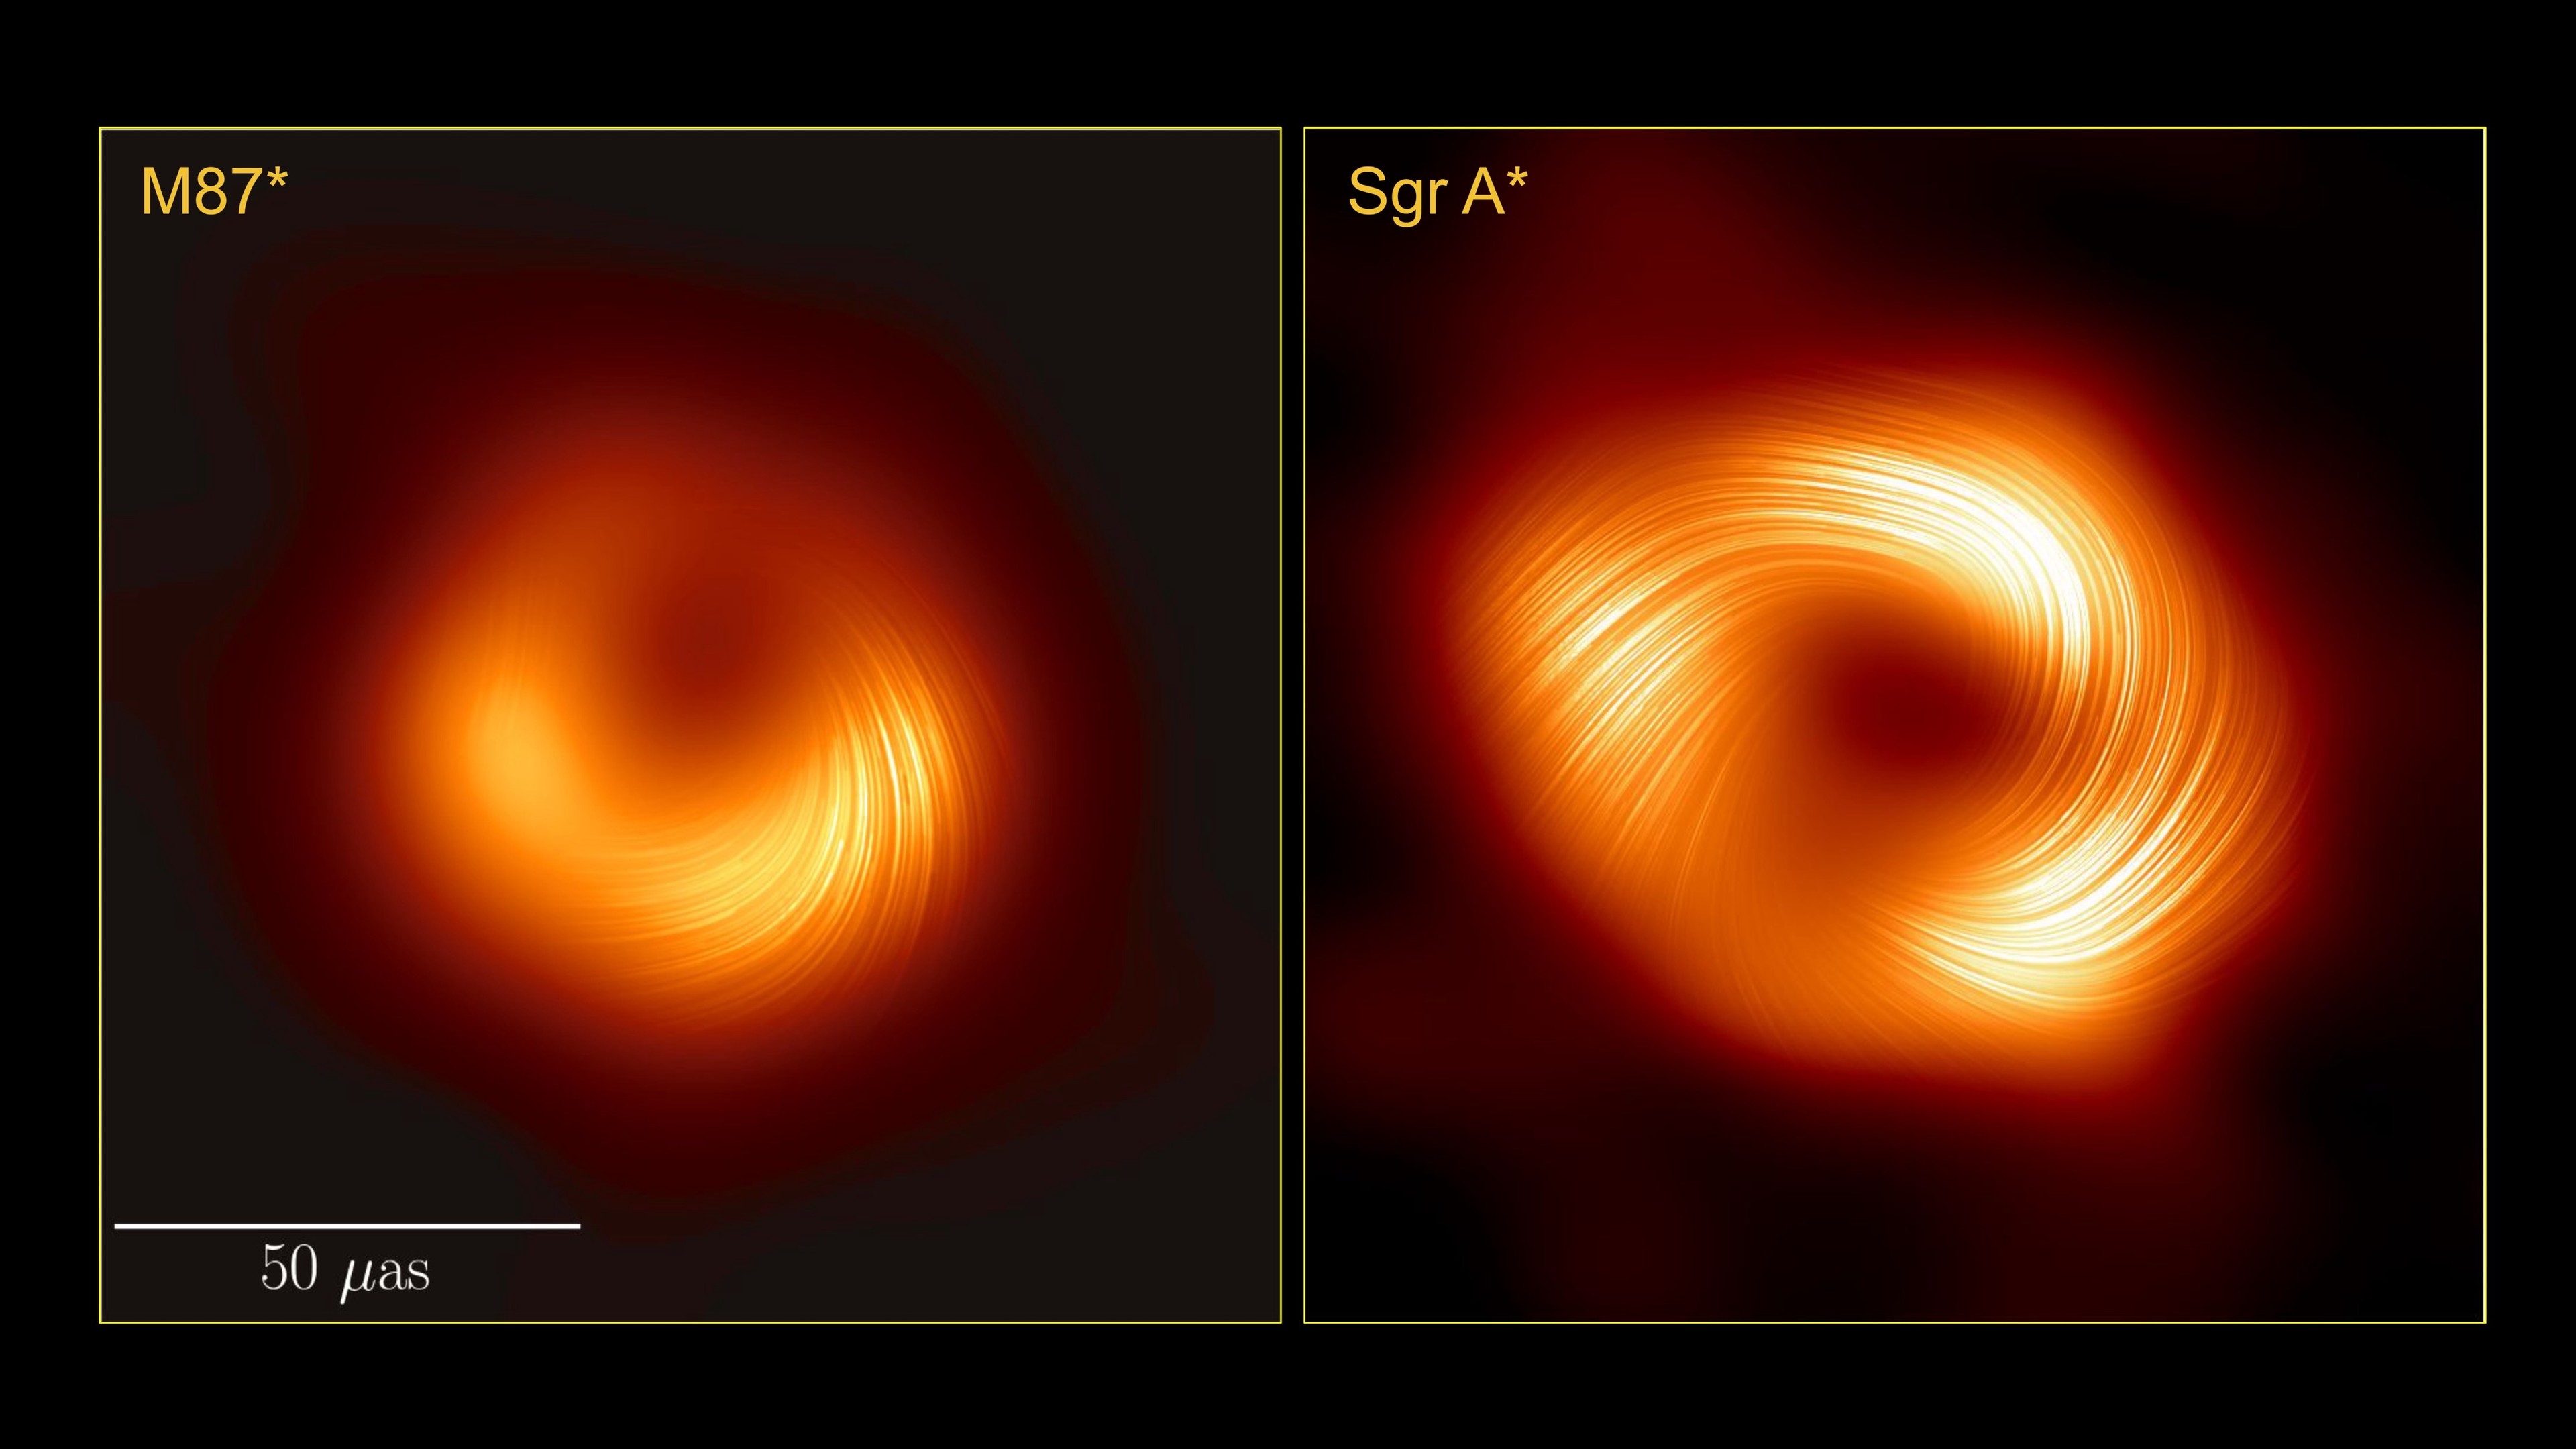 Two orange rings with hairy spiral structures. Left: image of black hole in M87, right: black hole Sagittarius A* in the Galactic Center. By Event Horizon Telescope 2024